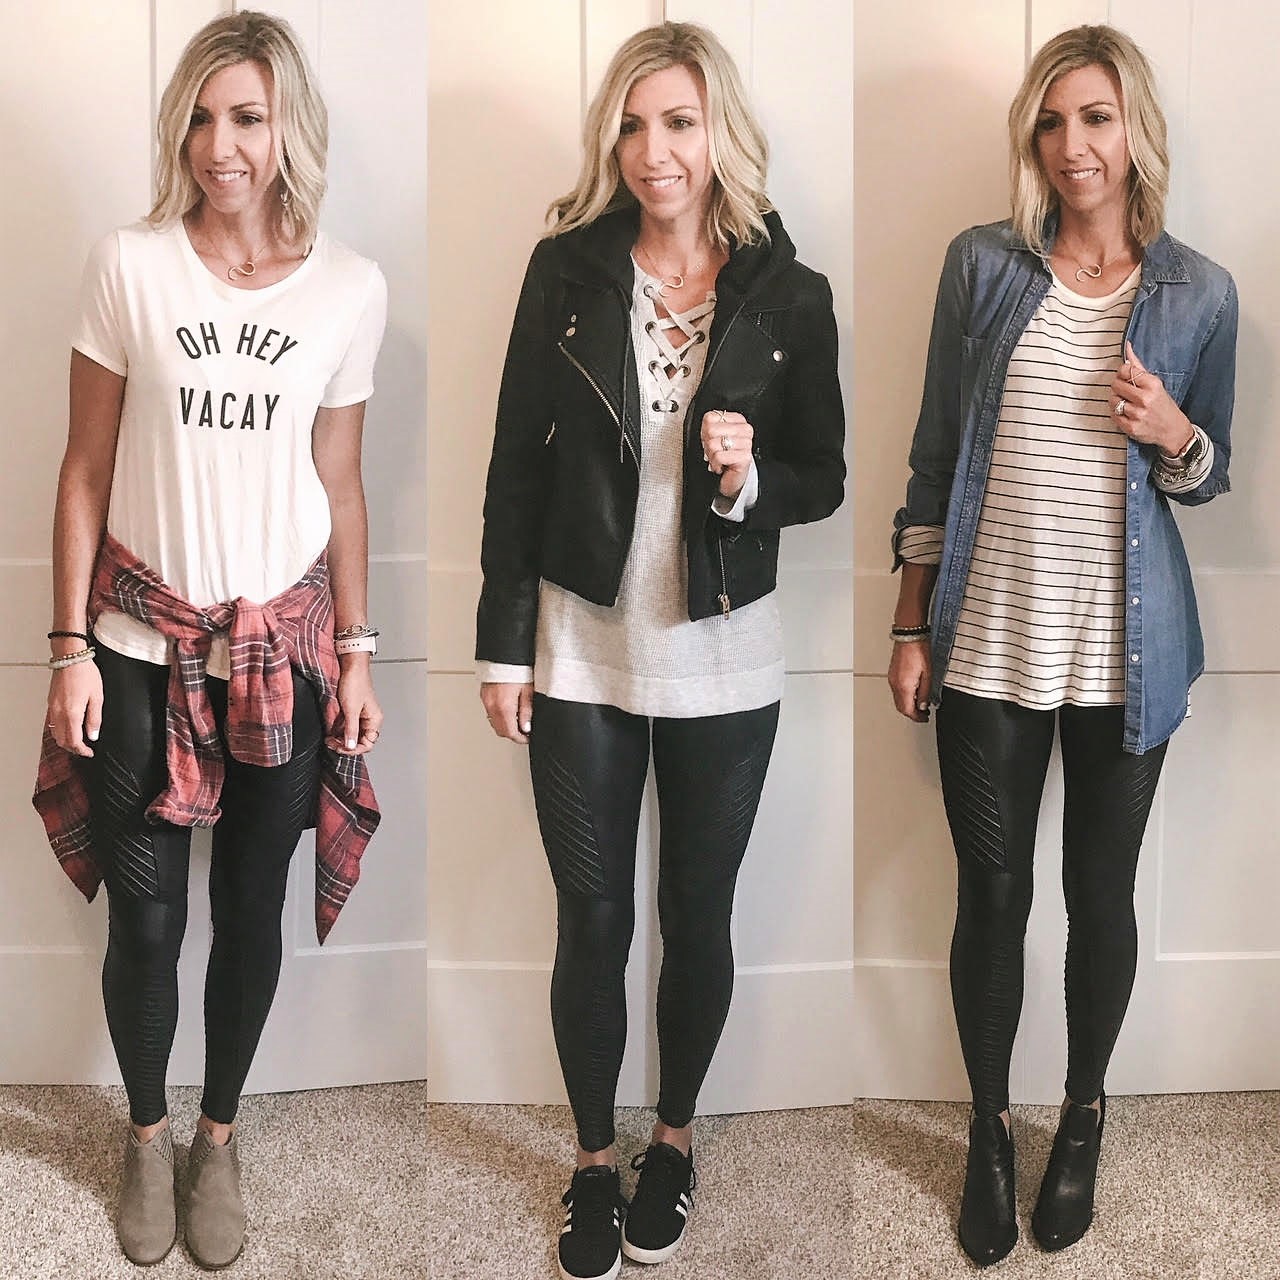 5 Ways To Wear Faux Leather Leggings For Women Over 40 - Regain Your  Confidence 